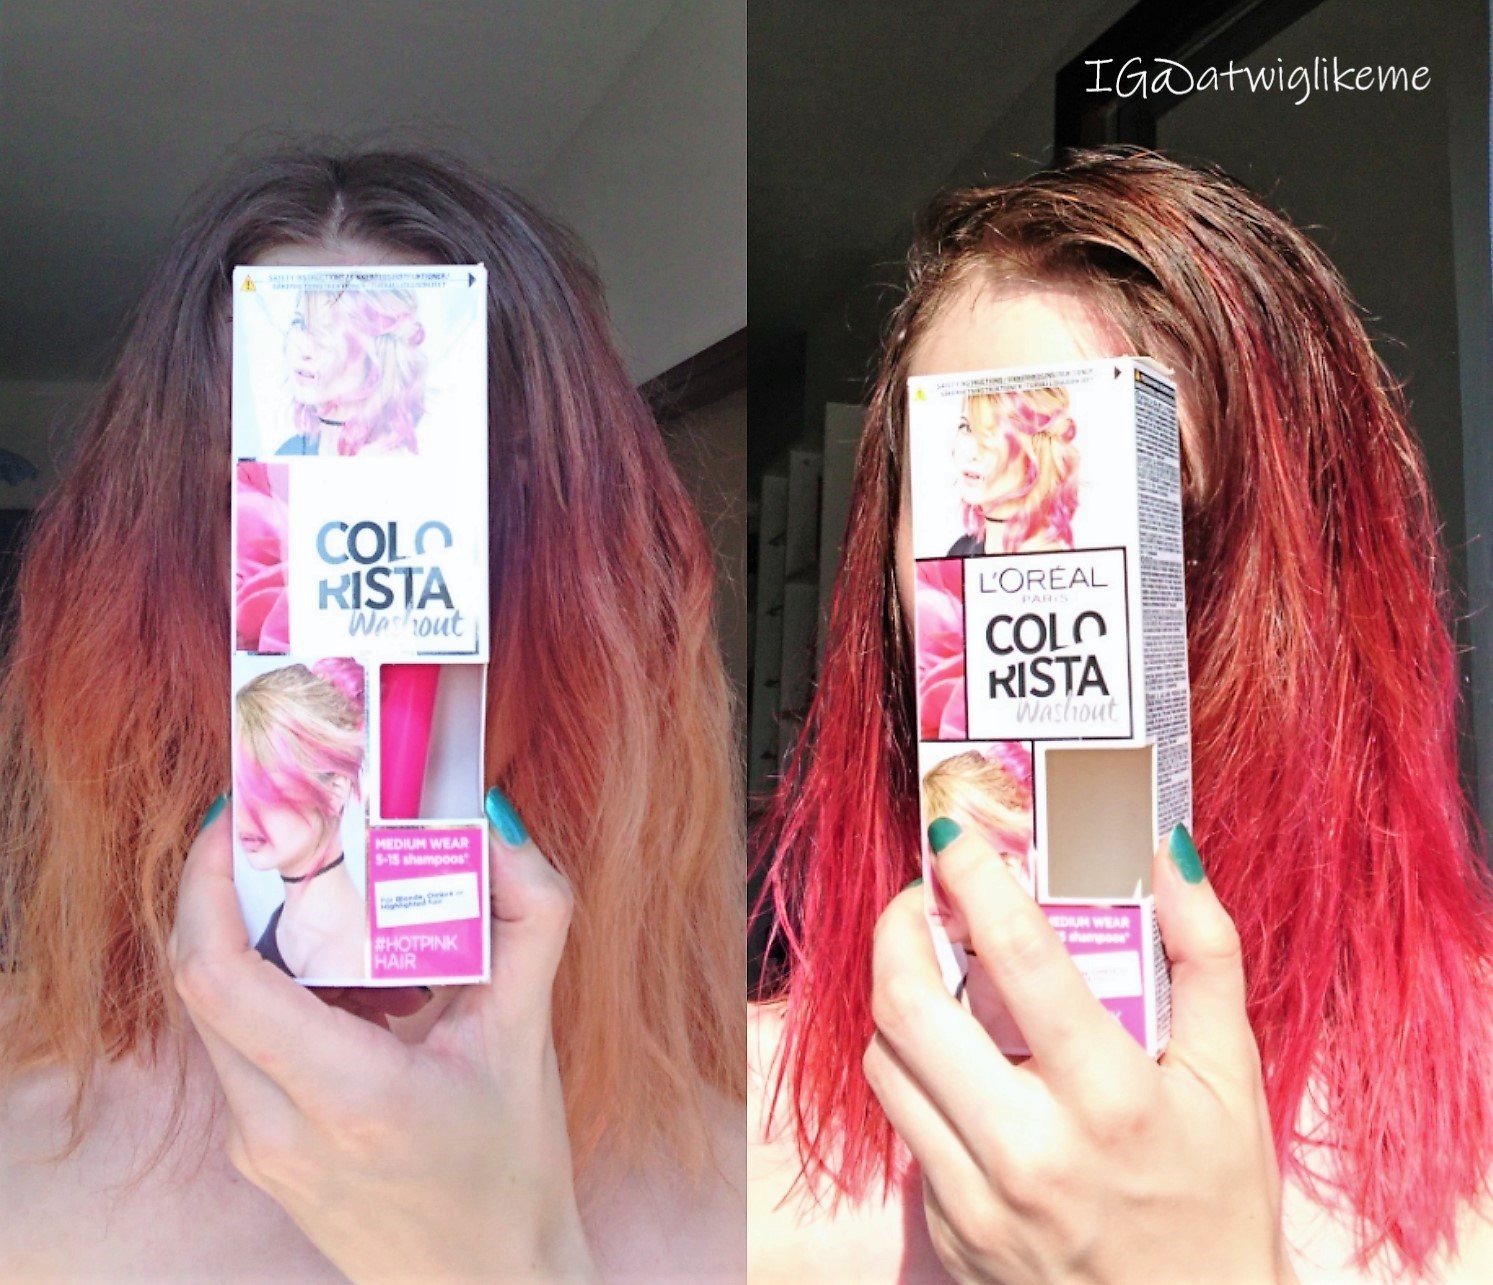 New baby #7: L'Oreal Colorista Washout in Hot Pink.